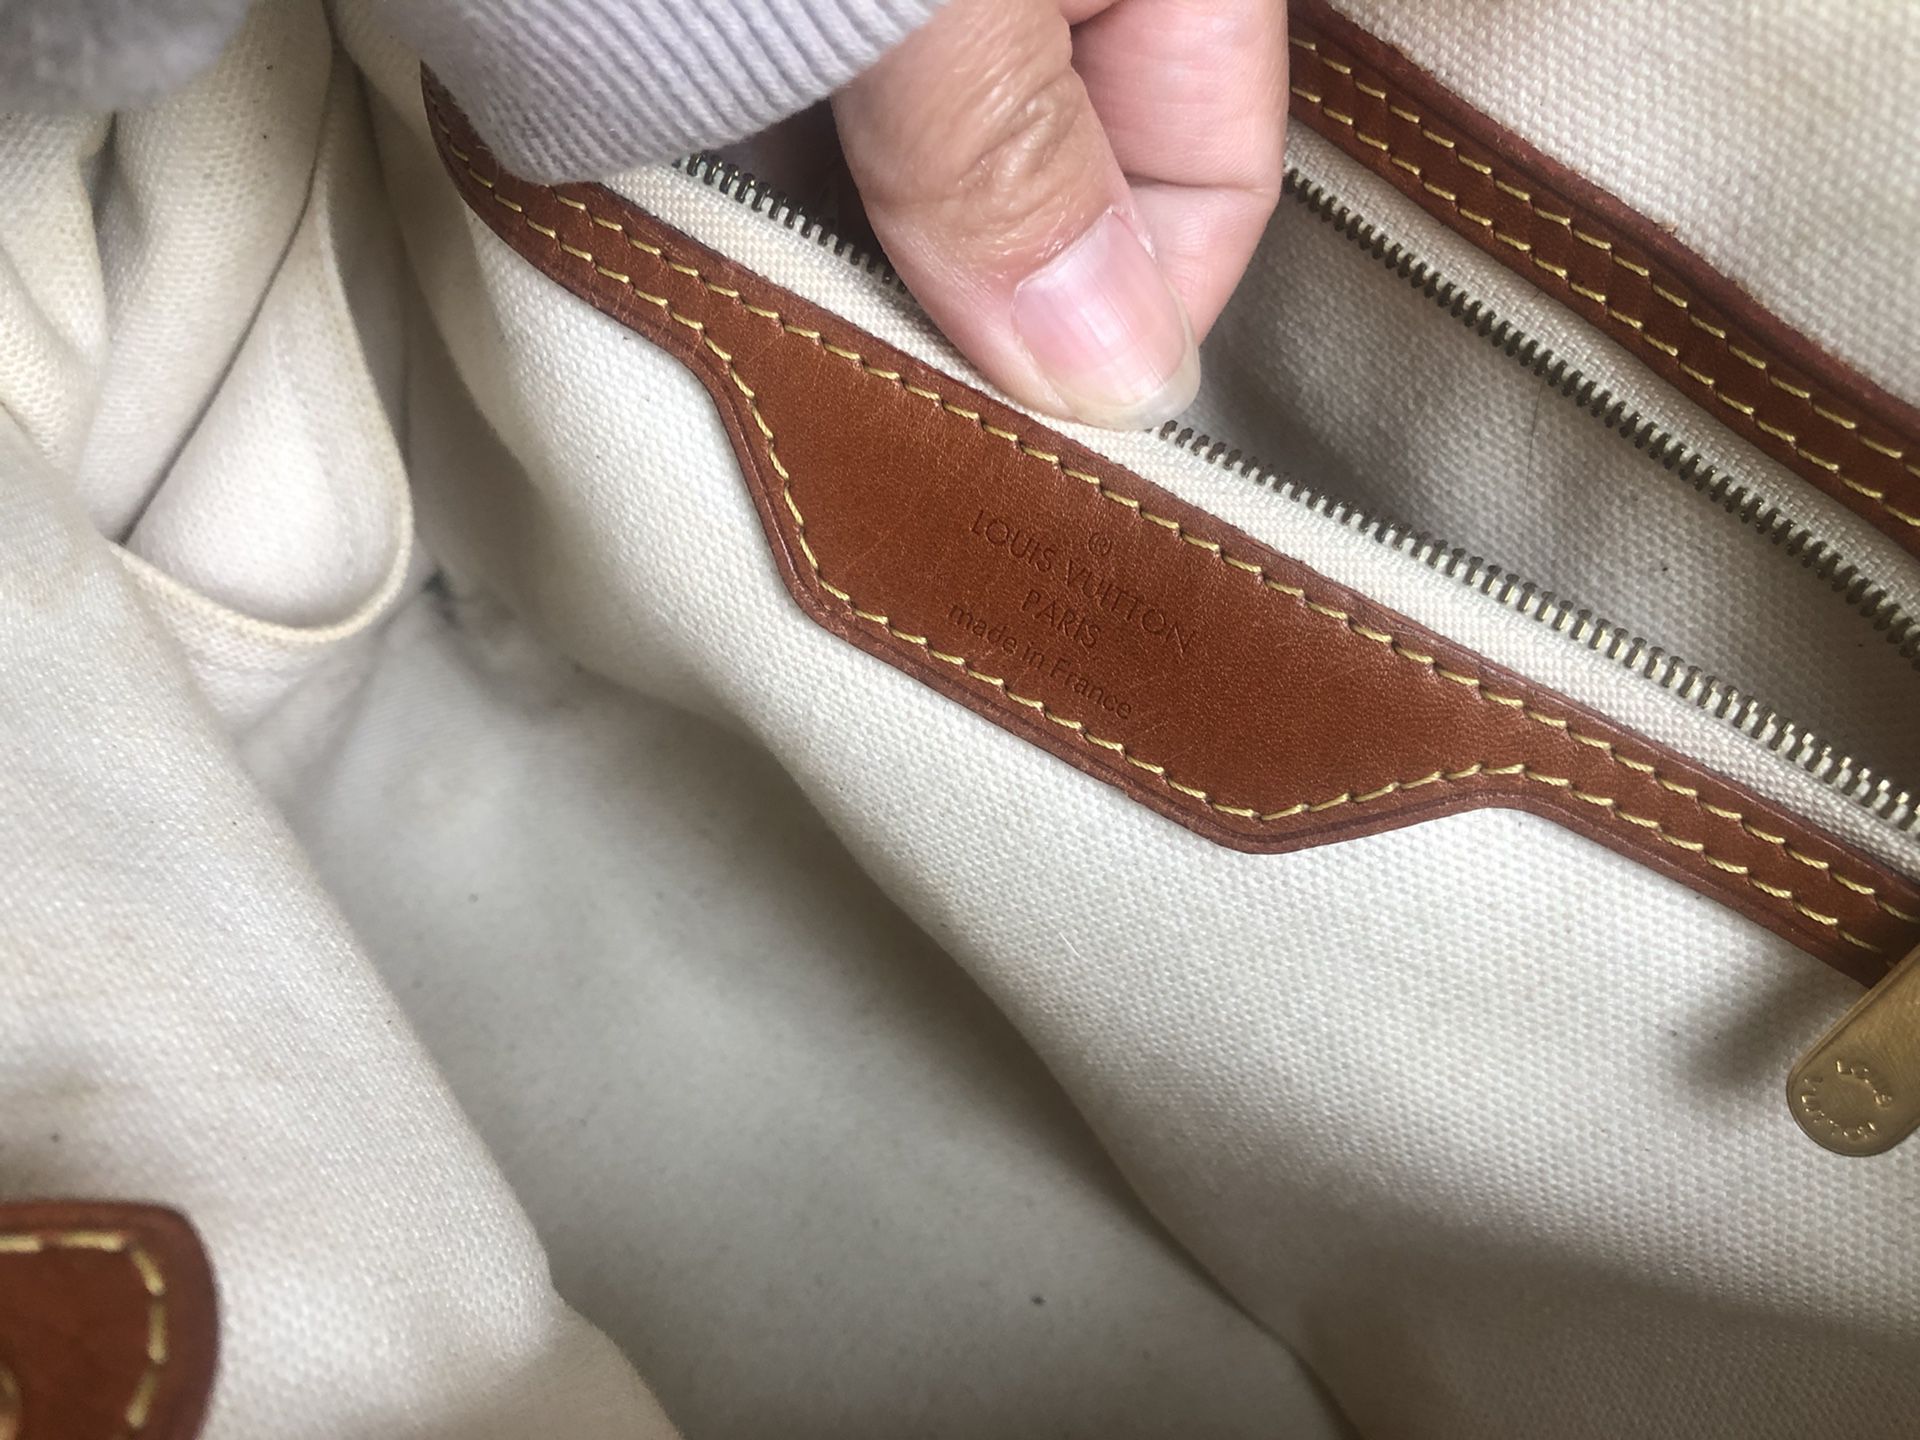 Authentic Palermo Gm LV Bag for Sale in Aiea, HI - OfferUp